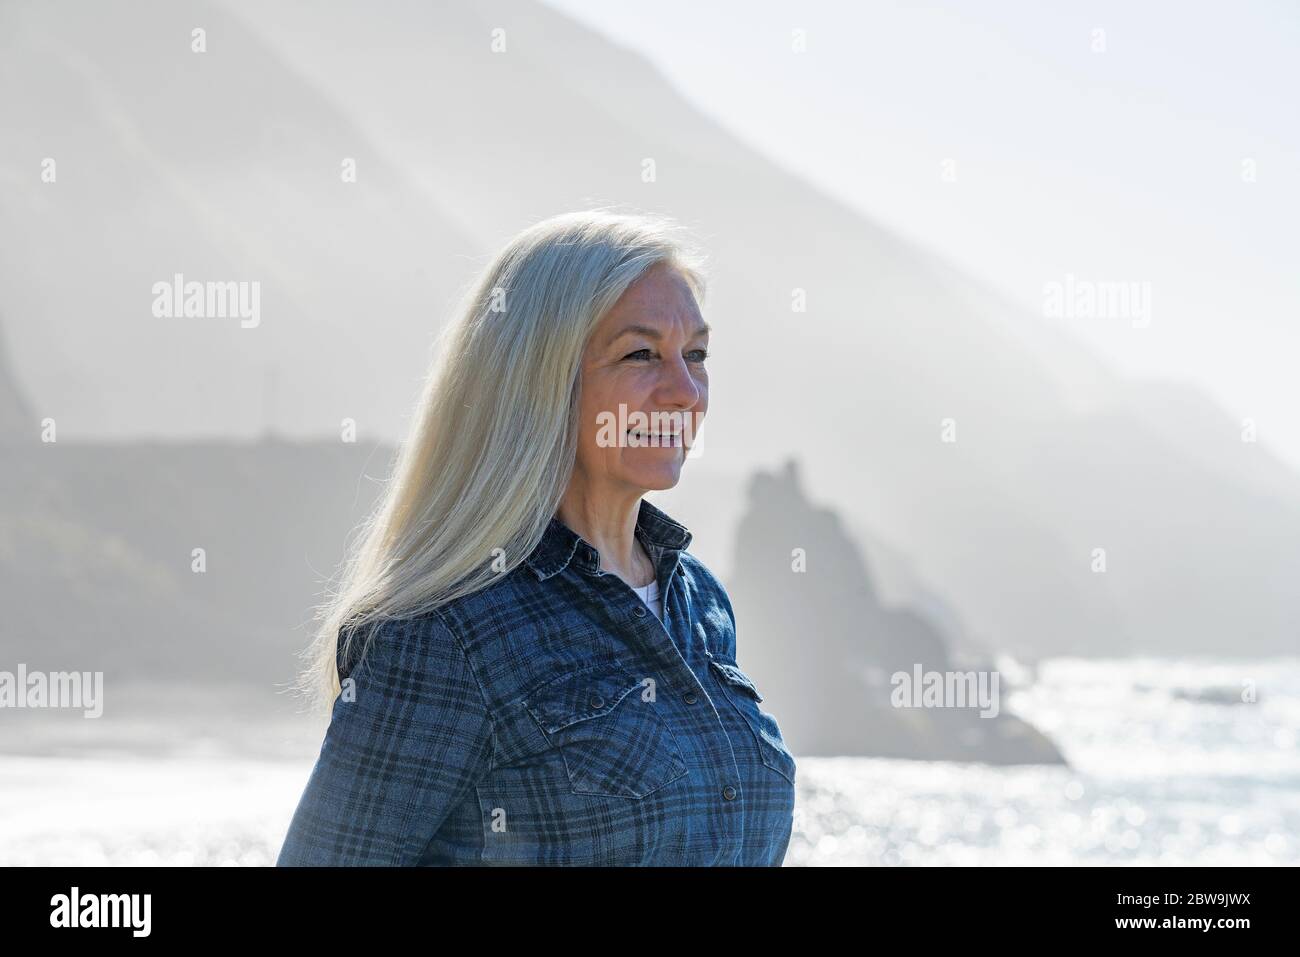 USA, California, Big Sur, Portrait of senior woman in front of cliffs Stock Photo